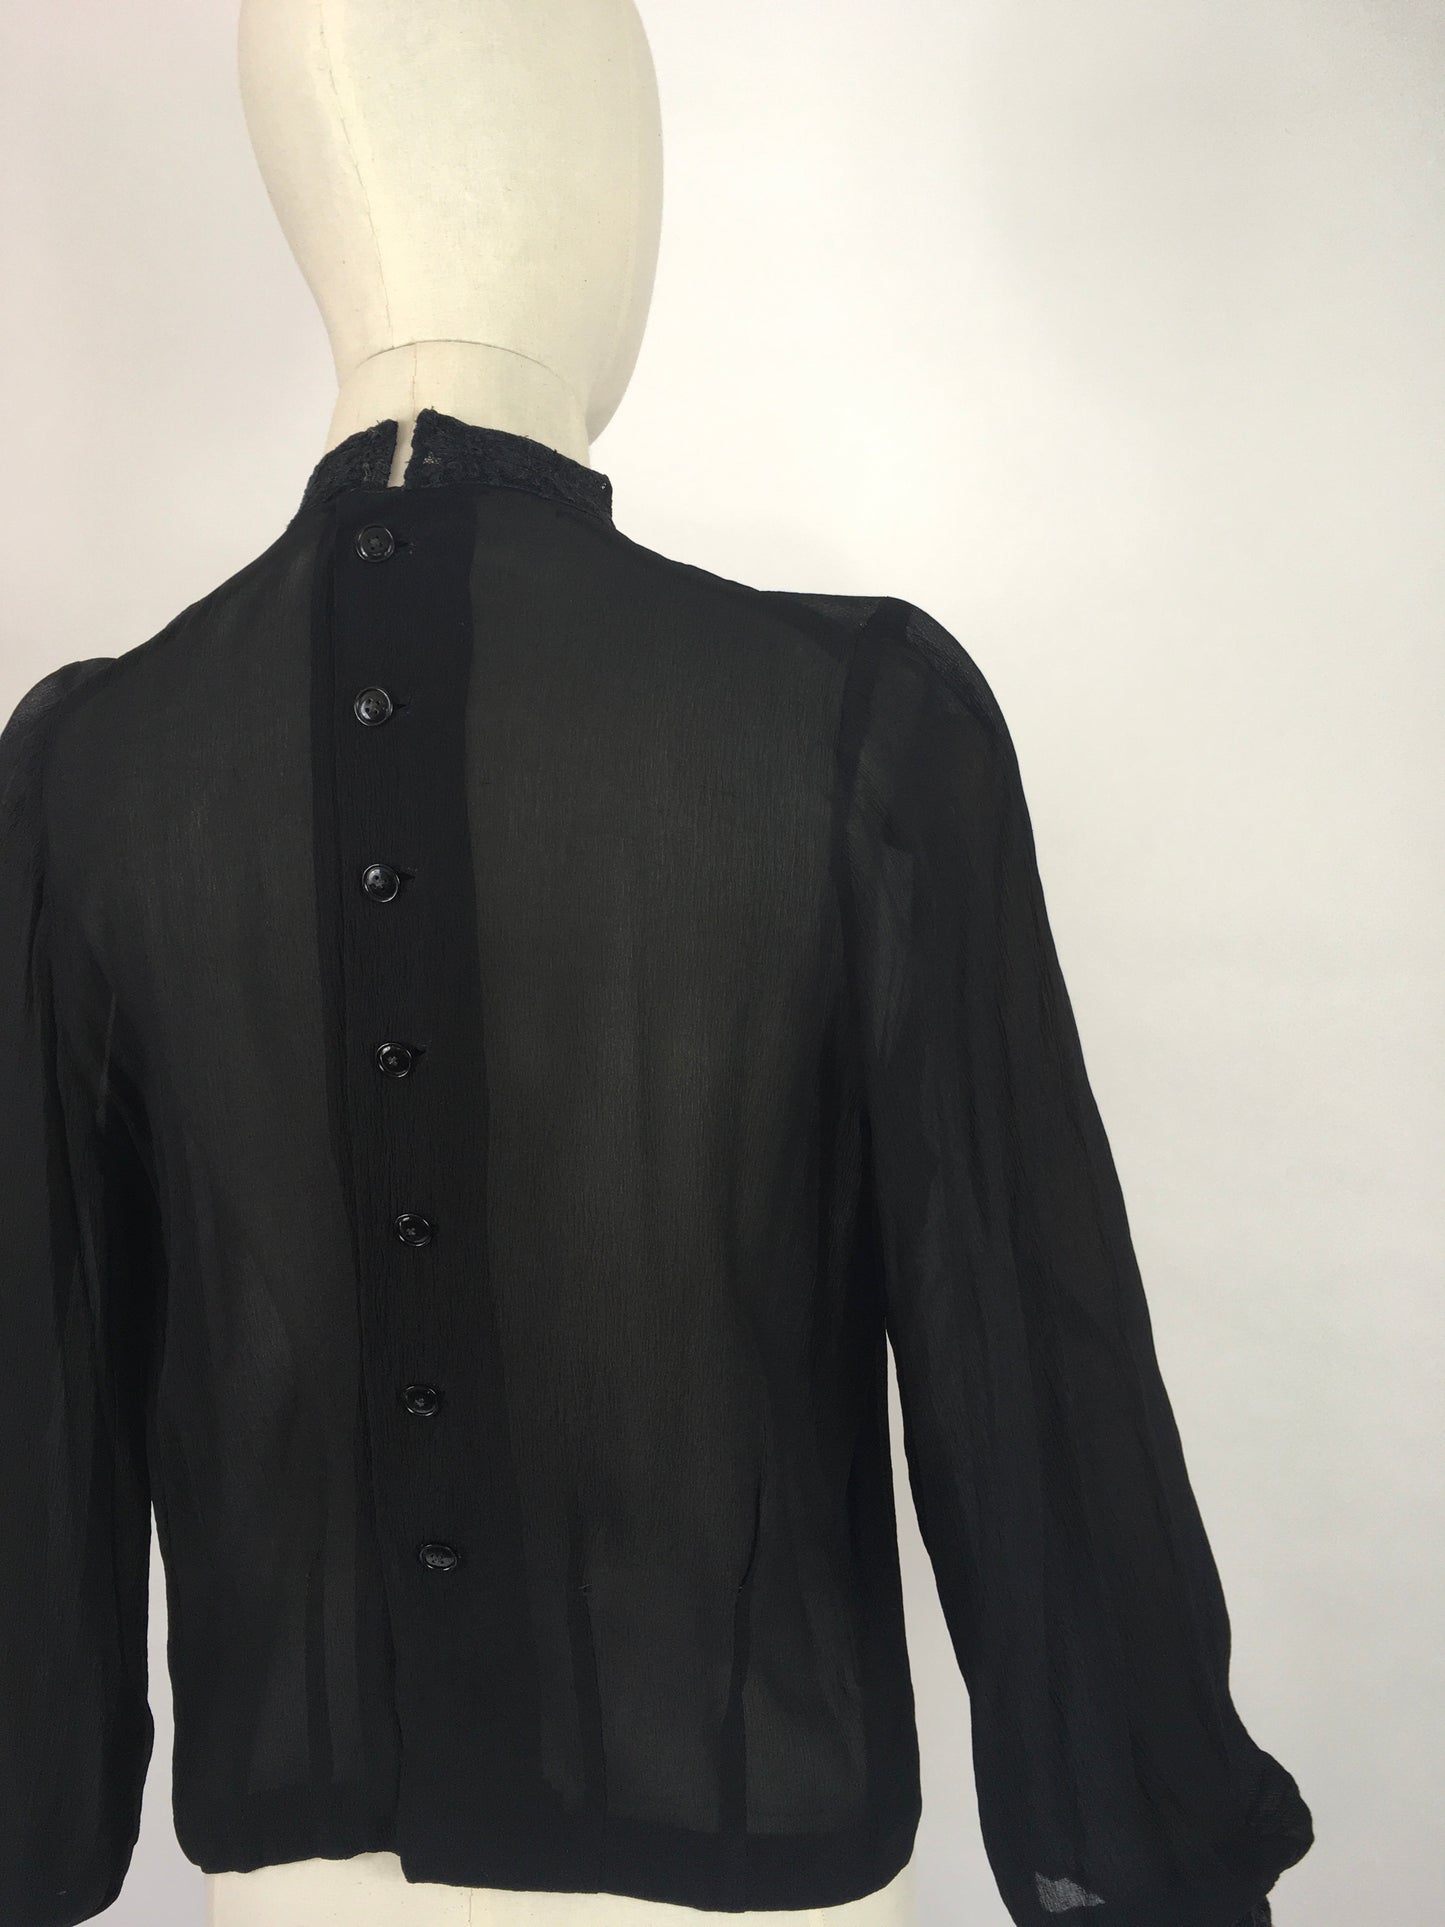 Original 1940’s Darling Sheer Black Blouse - With Beautiful Contrast Lace Detailing